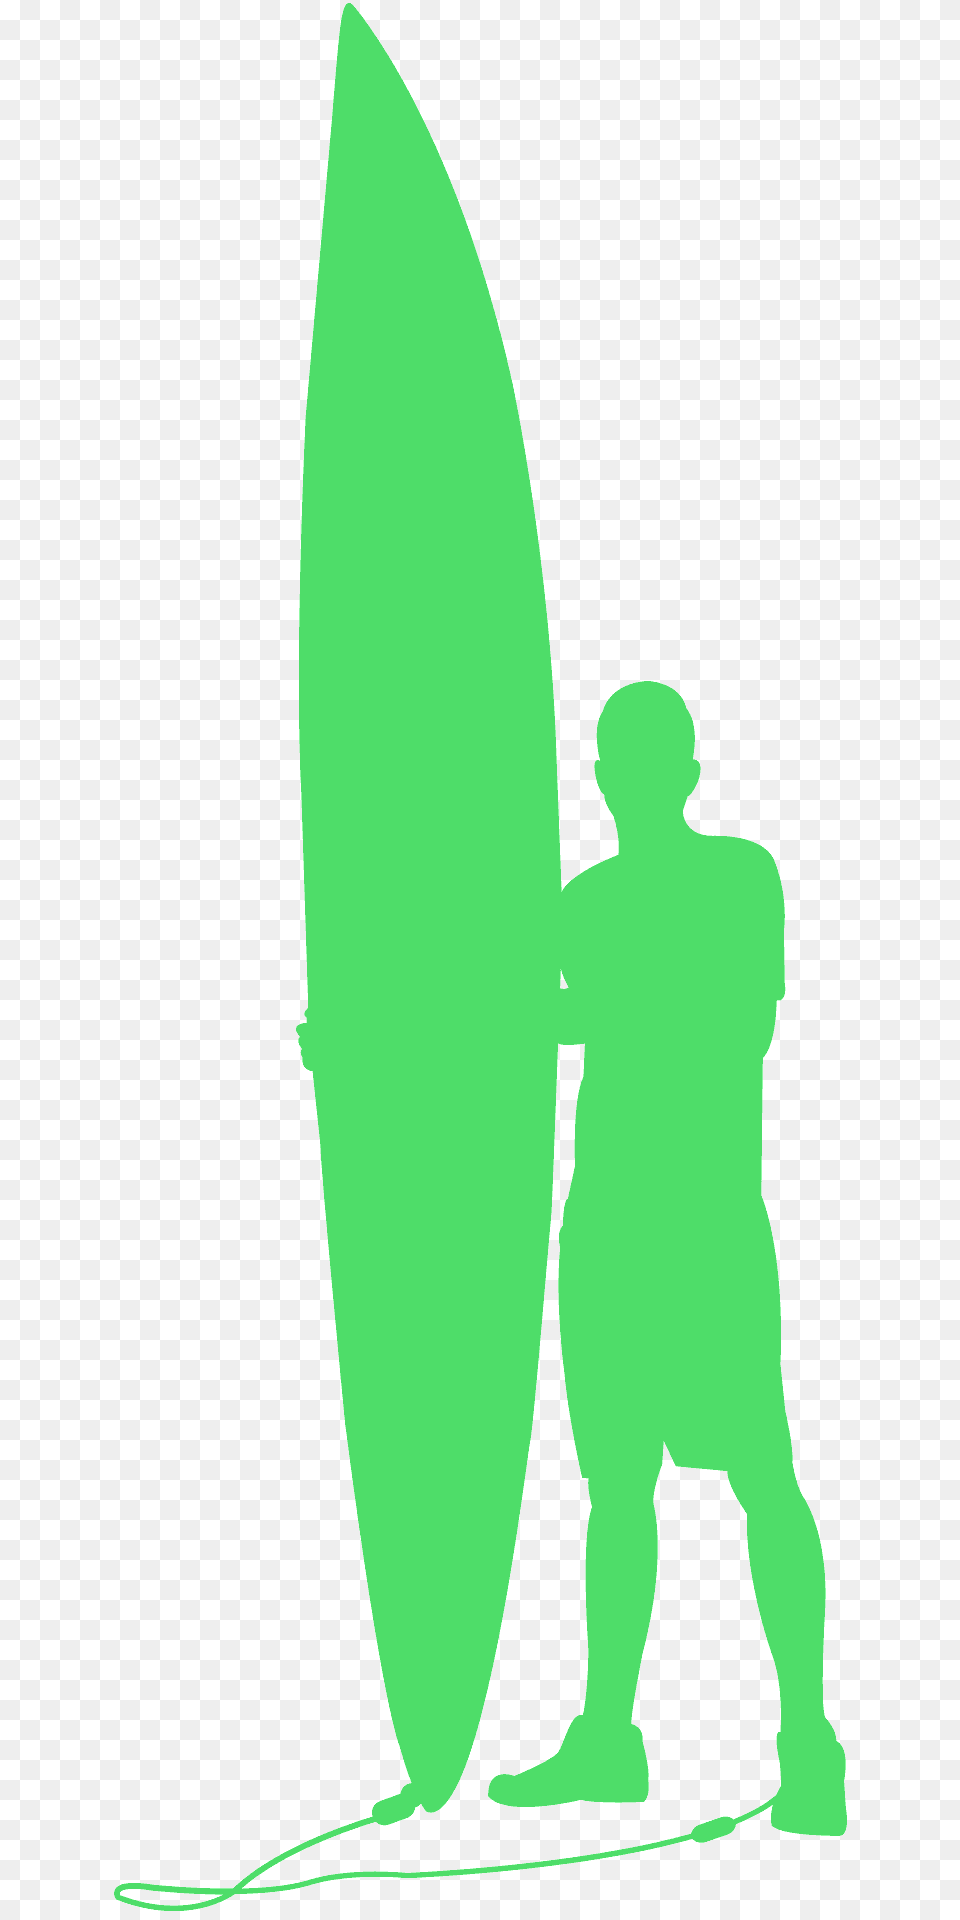 Surfboard Silhouette, Water, Leisure Activities, Surfing, Sport Png